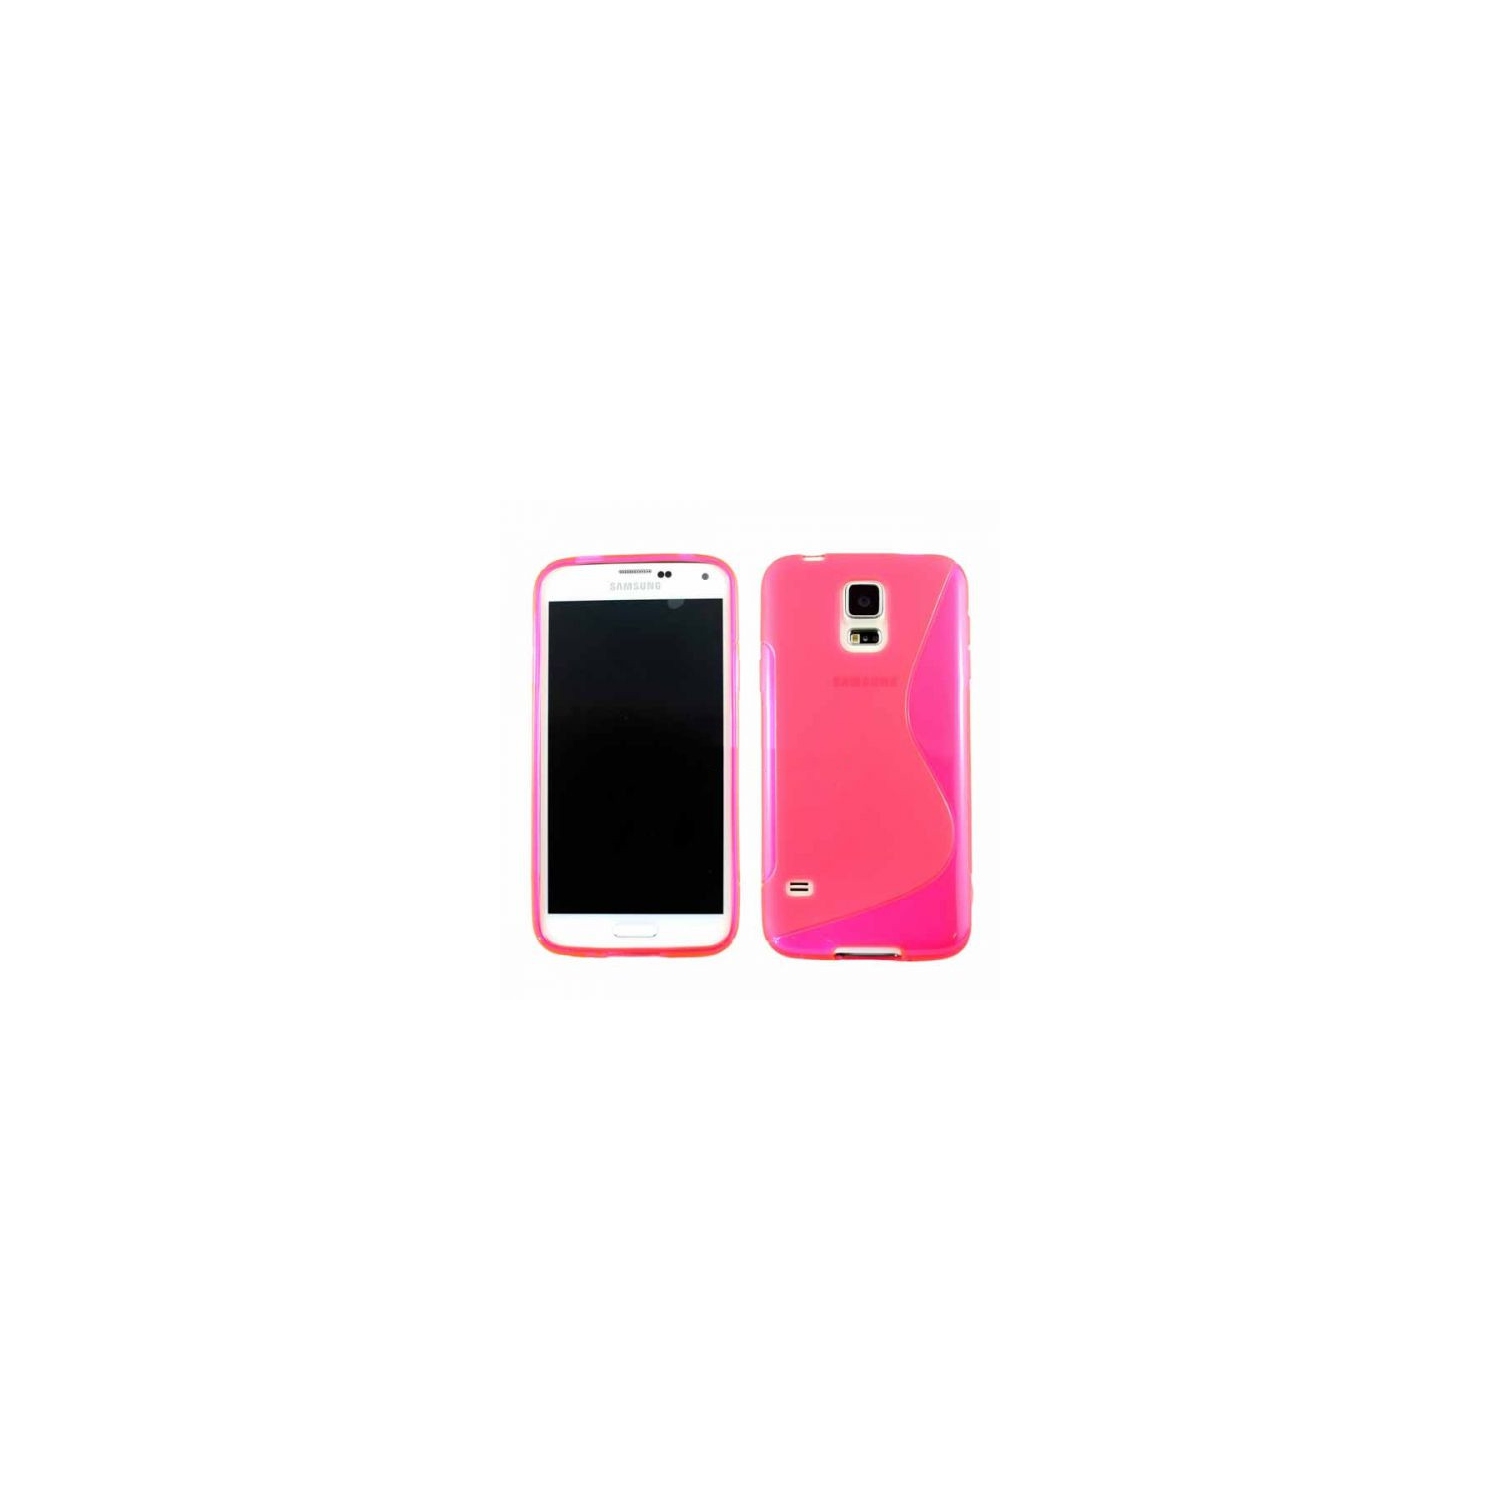 【CSmart】 Ultra Thin Soft TPU Silicone Jelly Bumper Back Cover Case for Samsung Galaxy S5, Pink